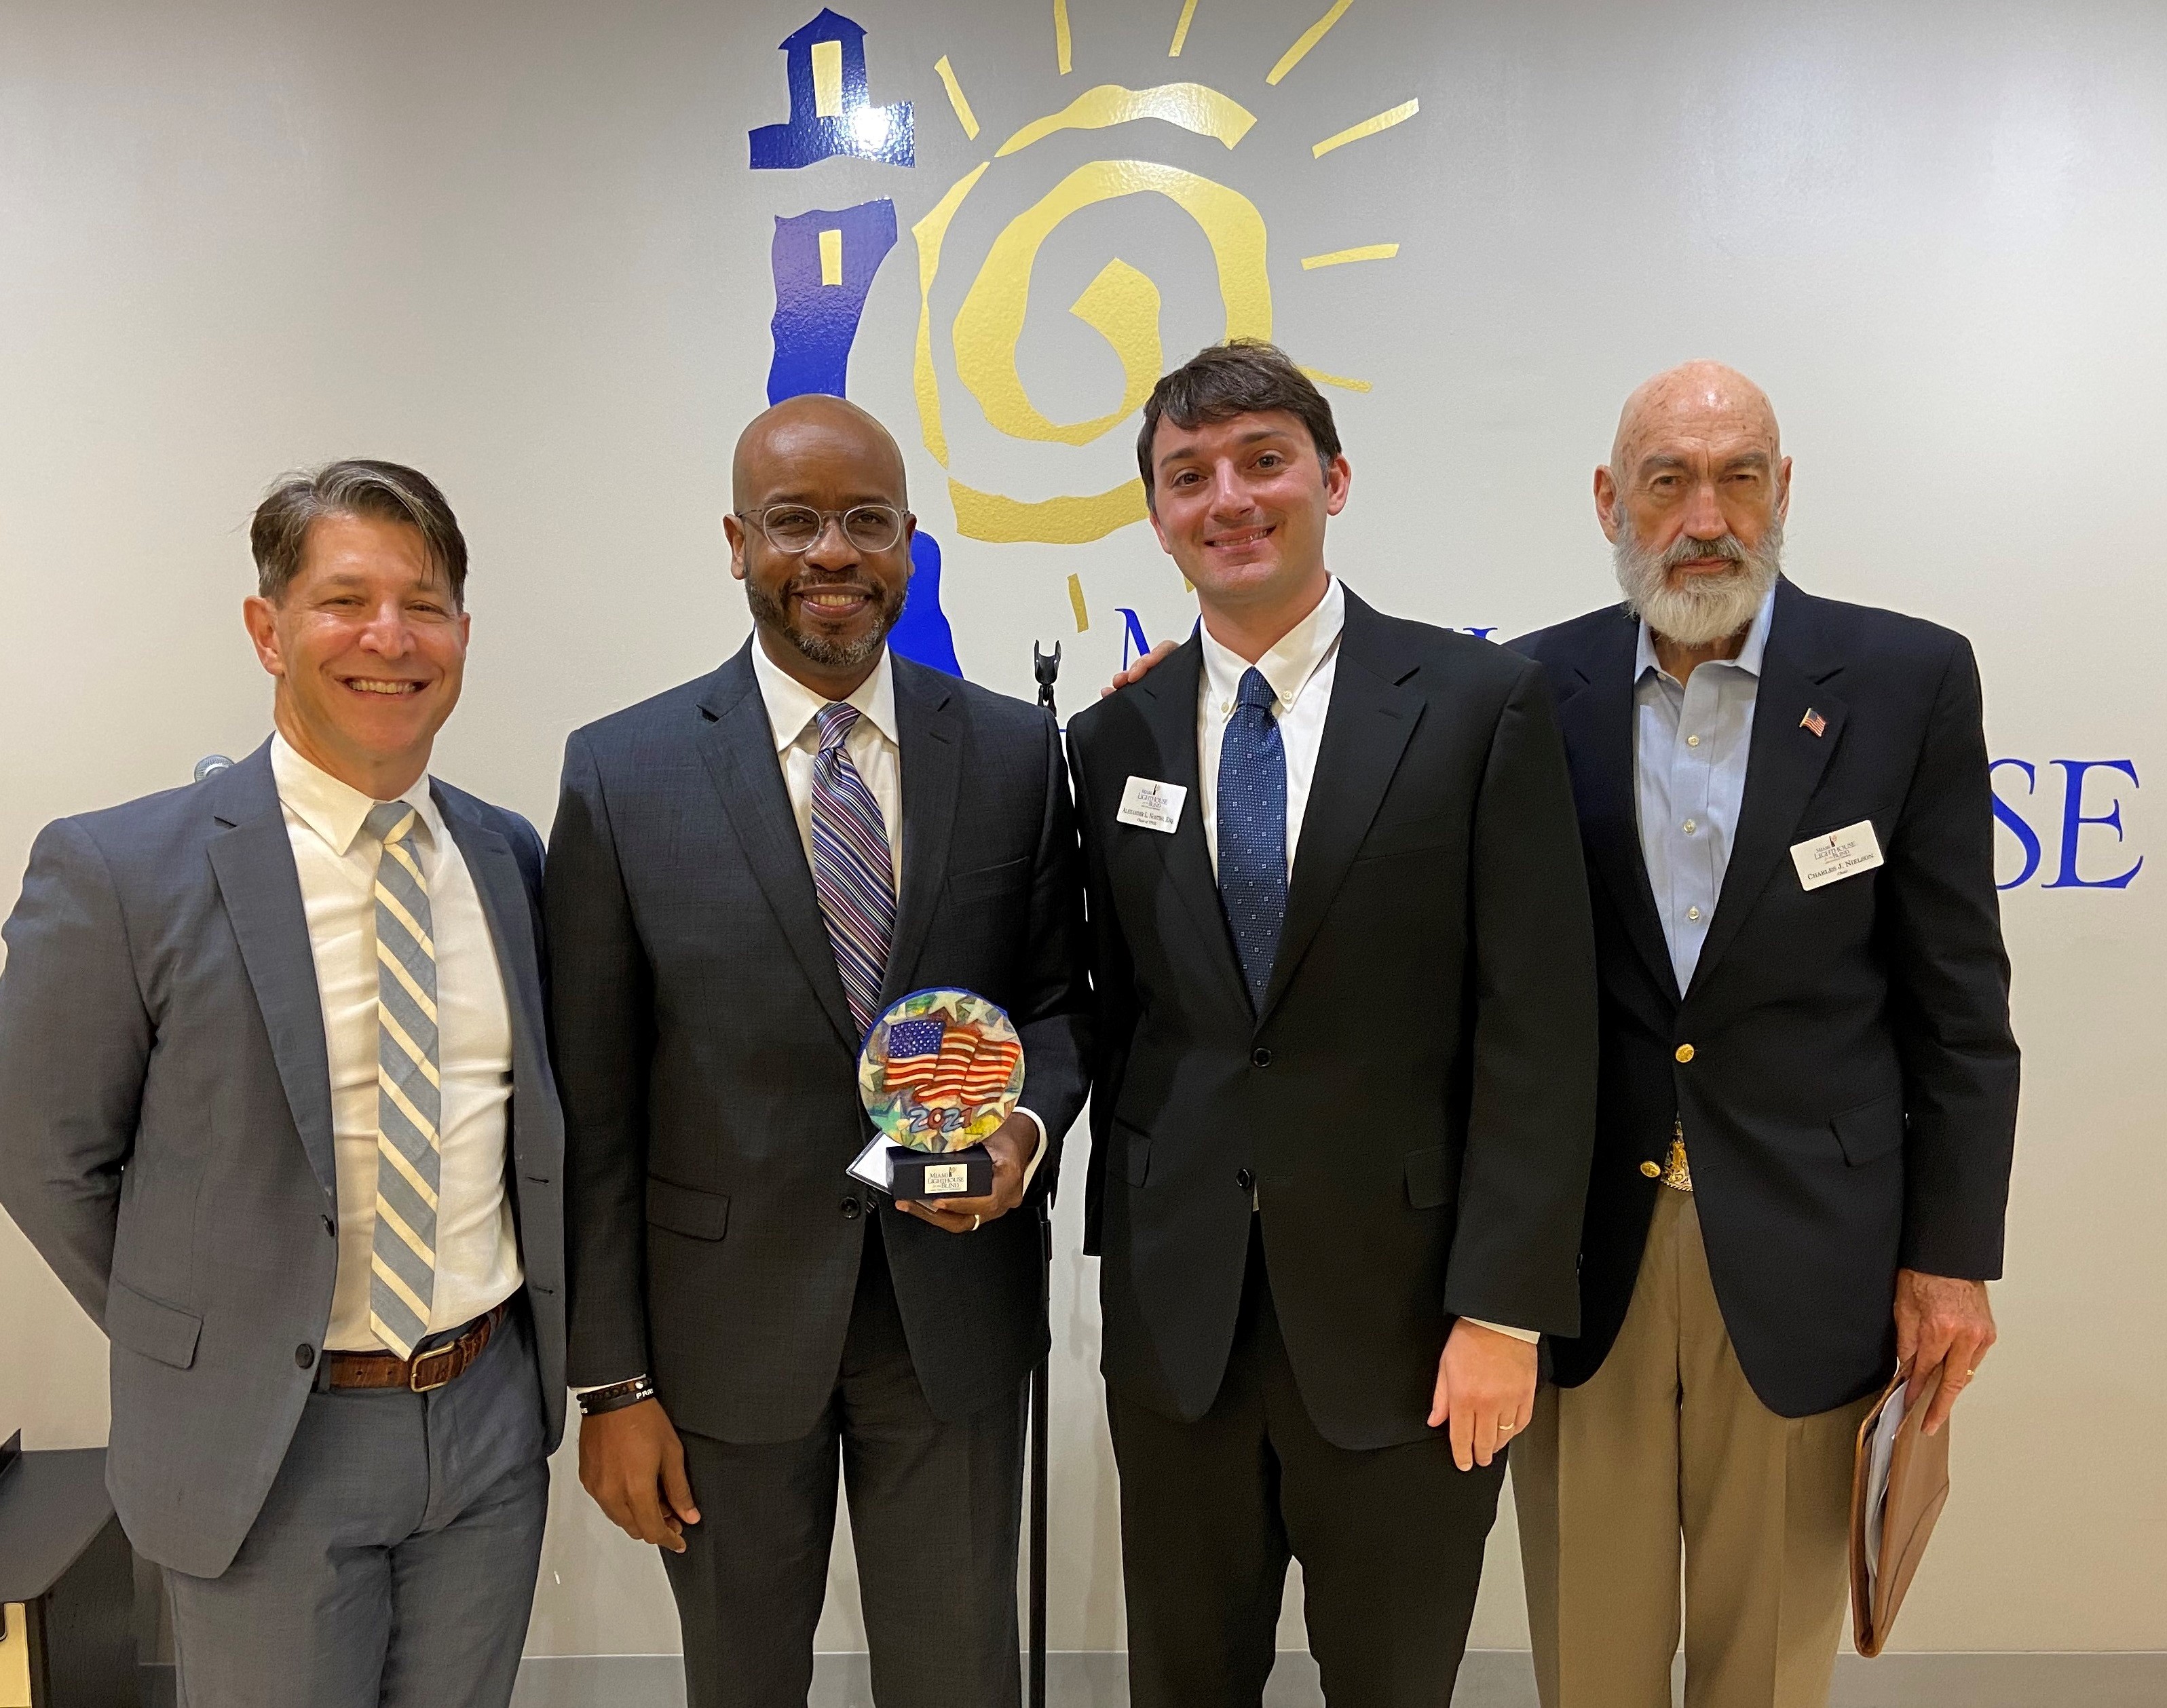 Event sponsors Mitchell Bierman and Marlon Hill from Weiss Serota Helfman Cole & Bierman presented with handmade plaque by YPOL Chair Alexander Nostro and Board Chair Charles Nielson Sr.